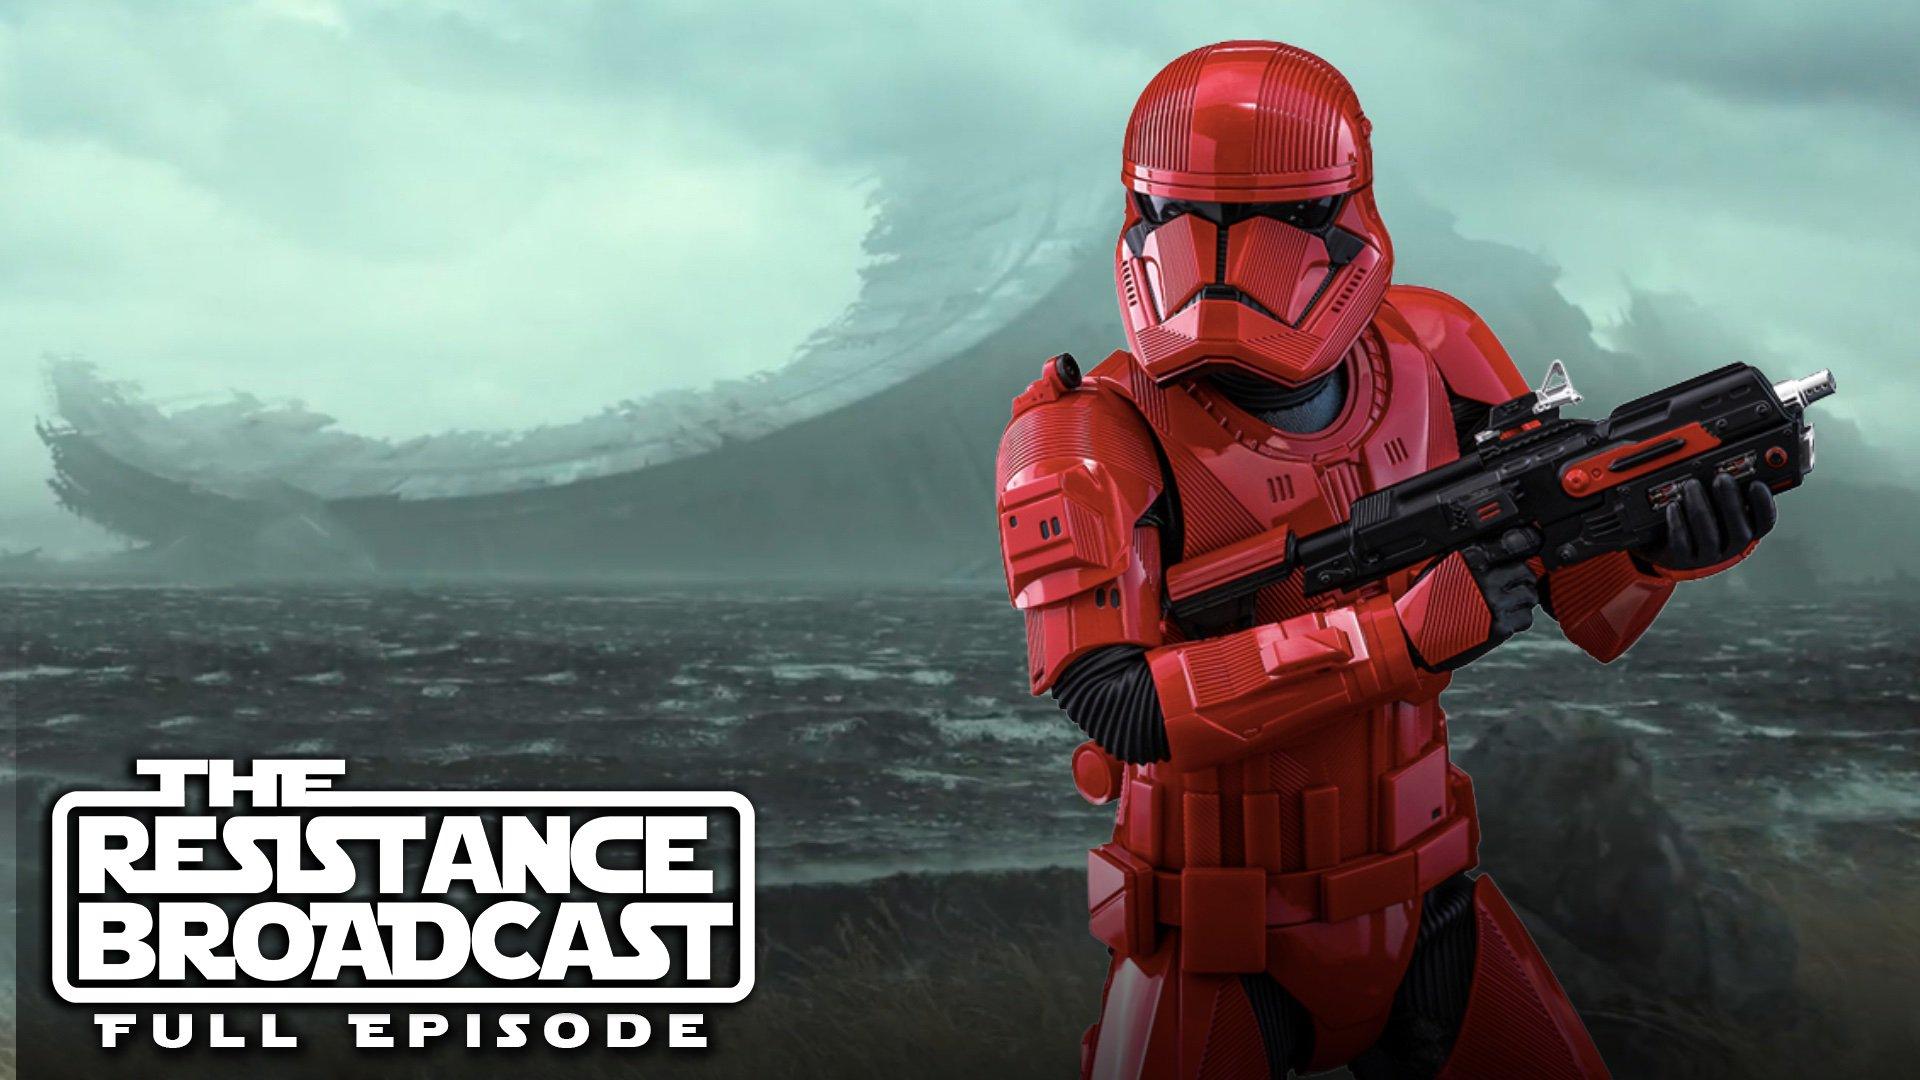 The Resistance Broadcast Sith Troopers Be More Than Merch